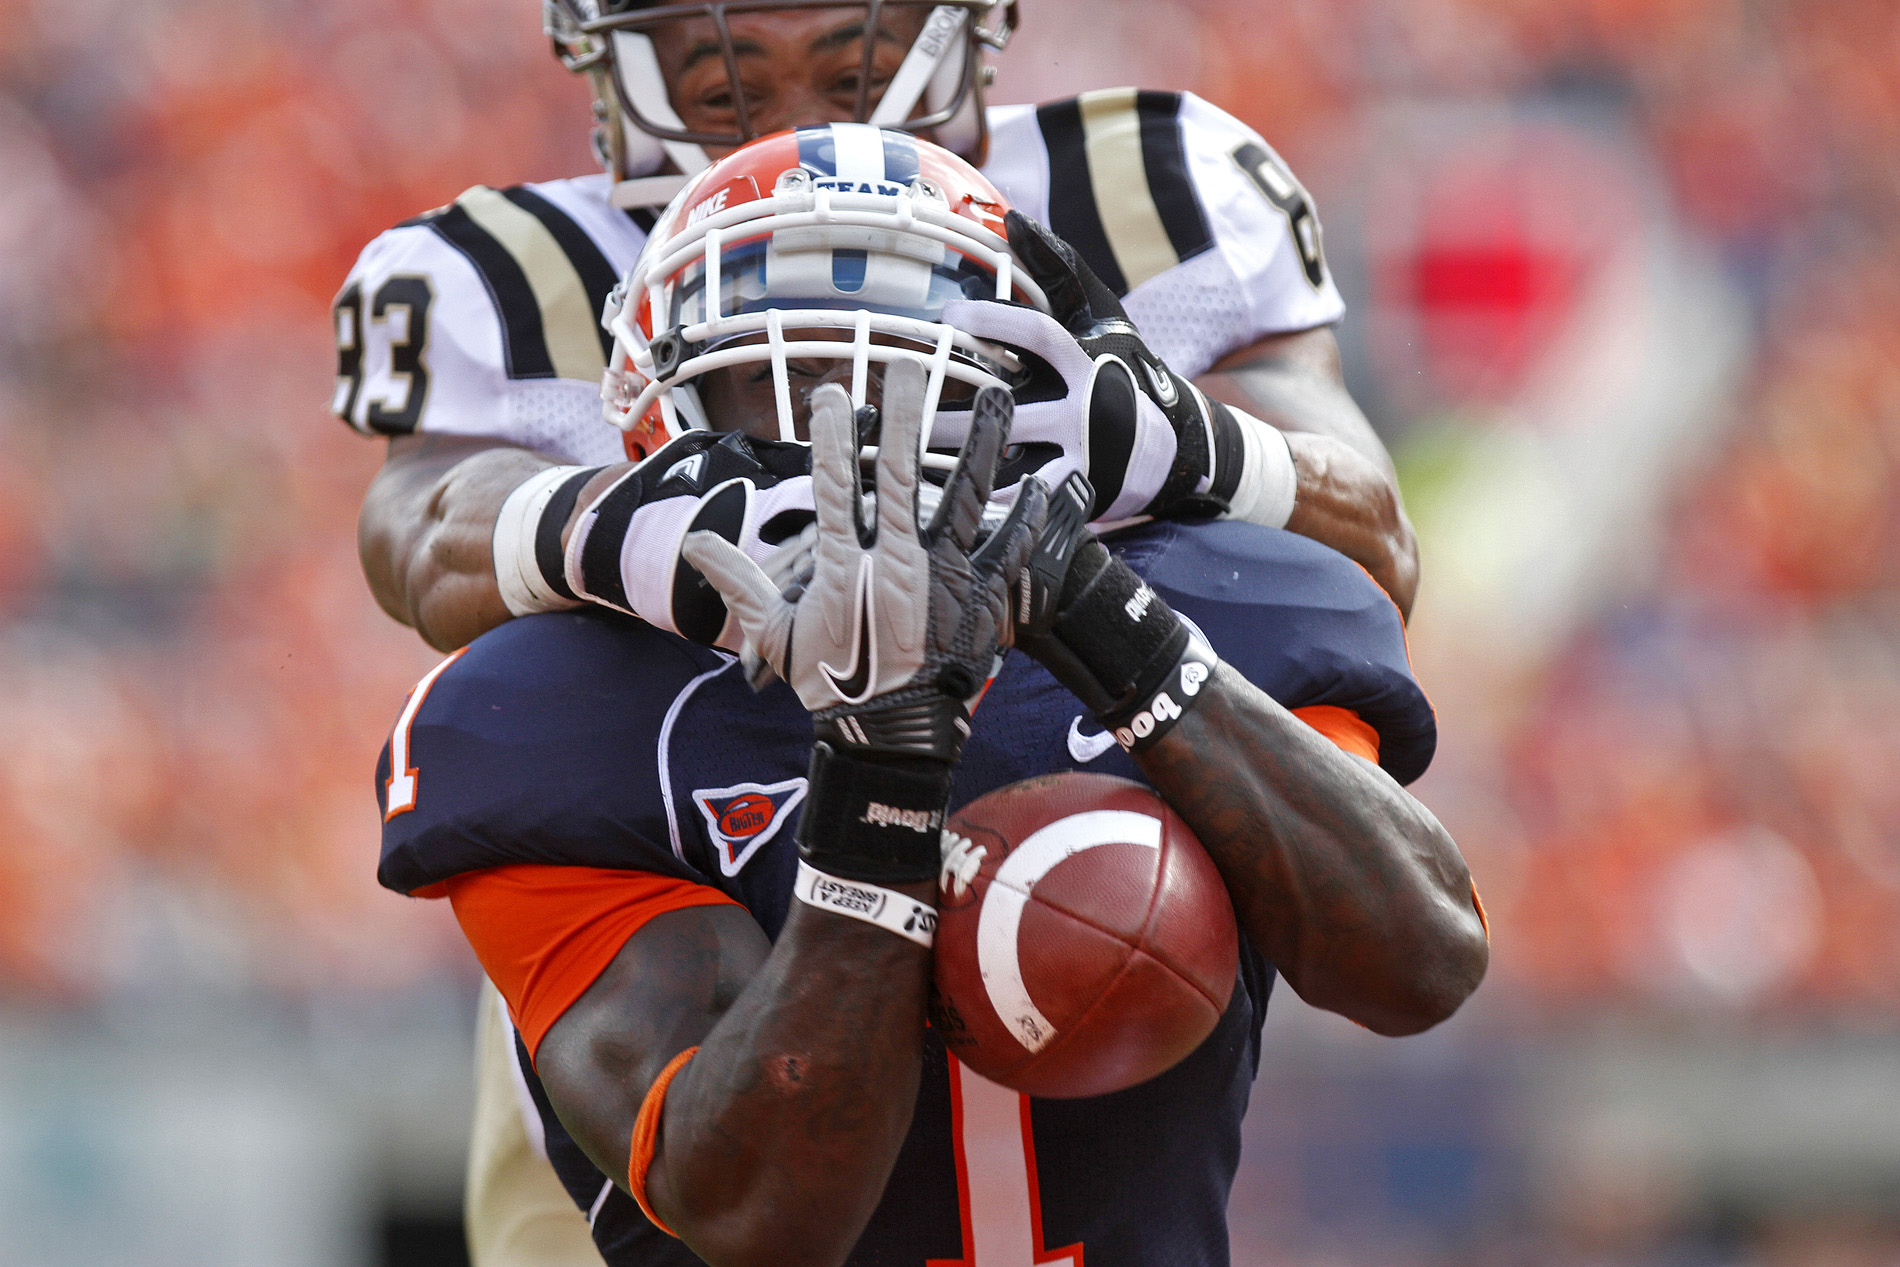 University of Illinois' Terry Hawthorne, center, attempts to intercept a ball intended for Western Michigan University's Jordan White during the September 24 game at Memorial Stadium.